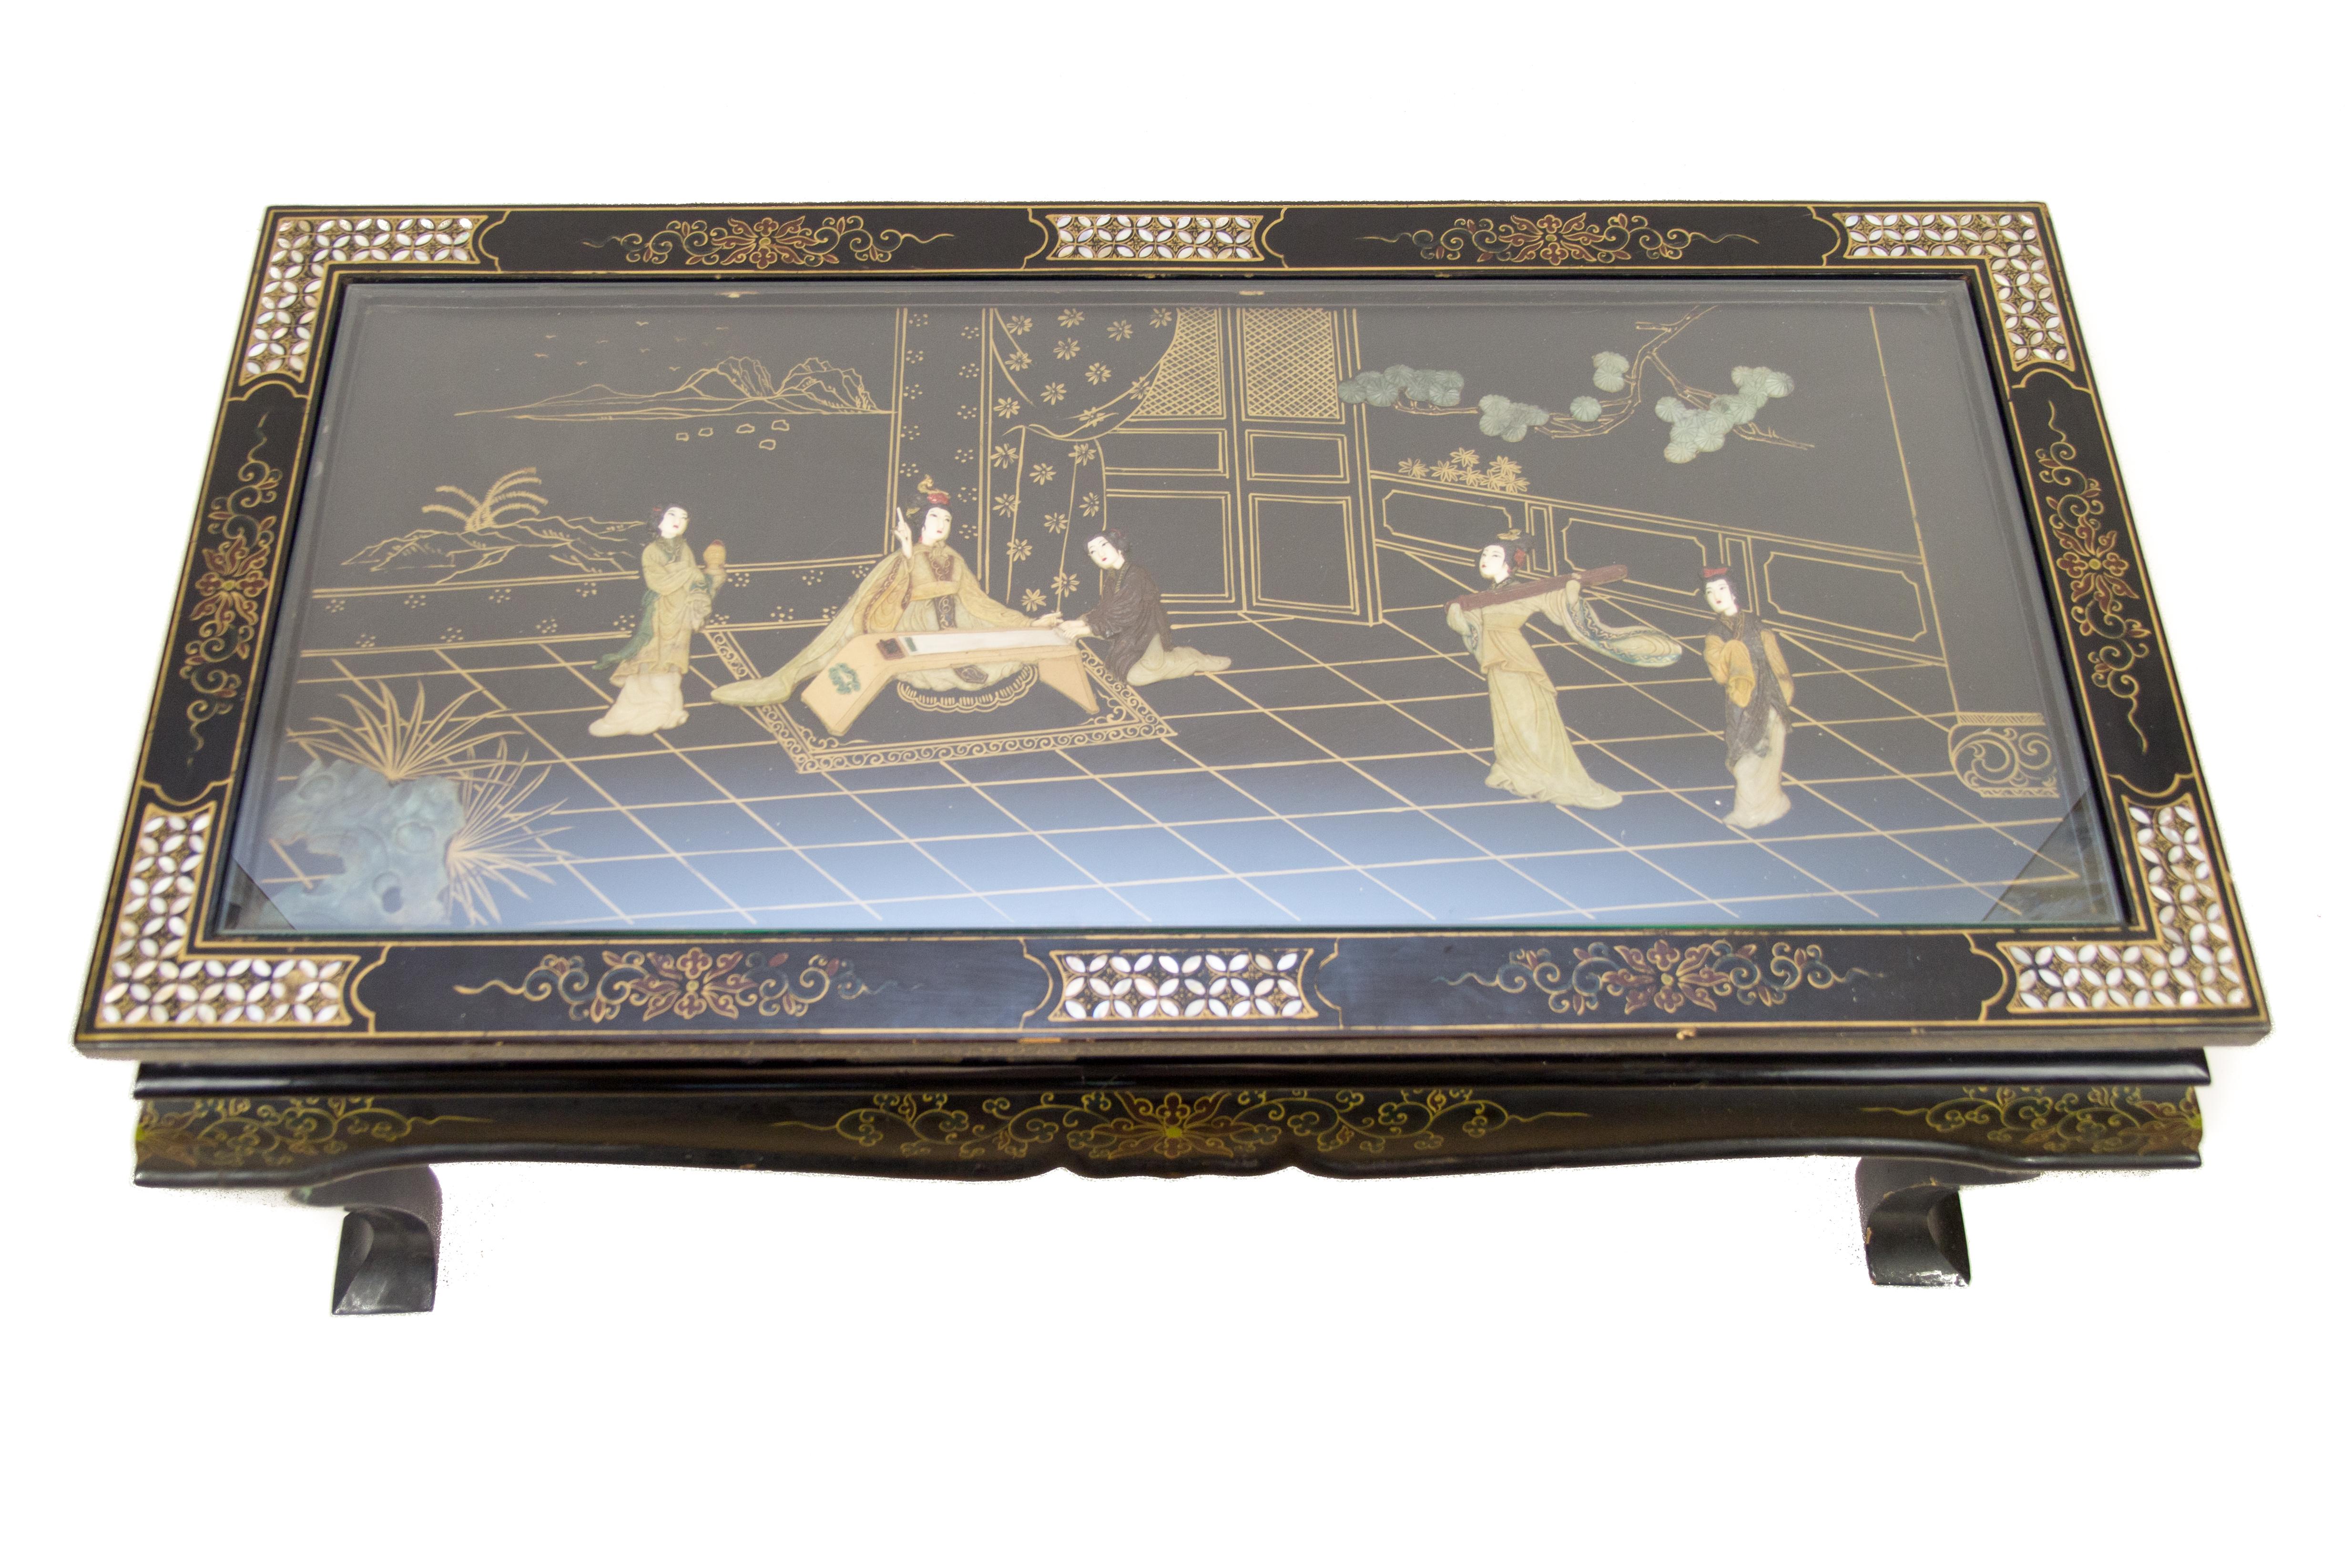 A beautiful vintage Chinese coffee table in lacquered and painted wood from the 1950s. The wooden, rectangular frame is decorated with painted floral details and mother of pearl inlays. A rectangular glass in the top protects the delicately sculpted